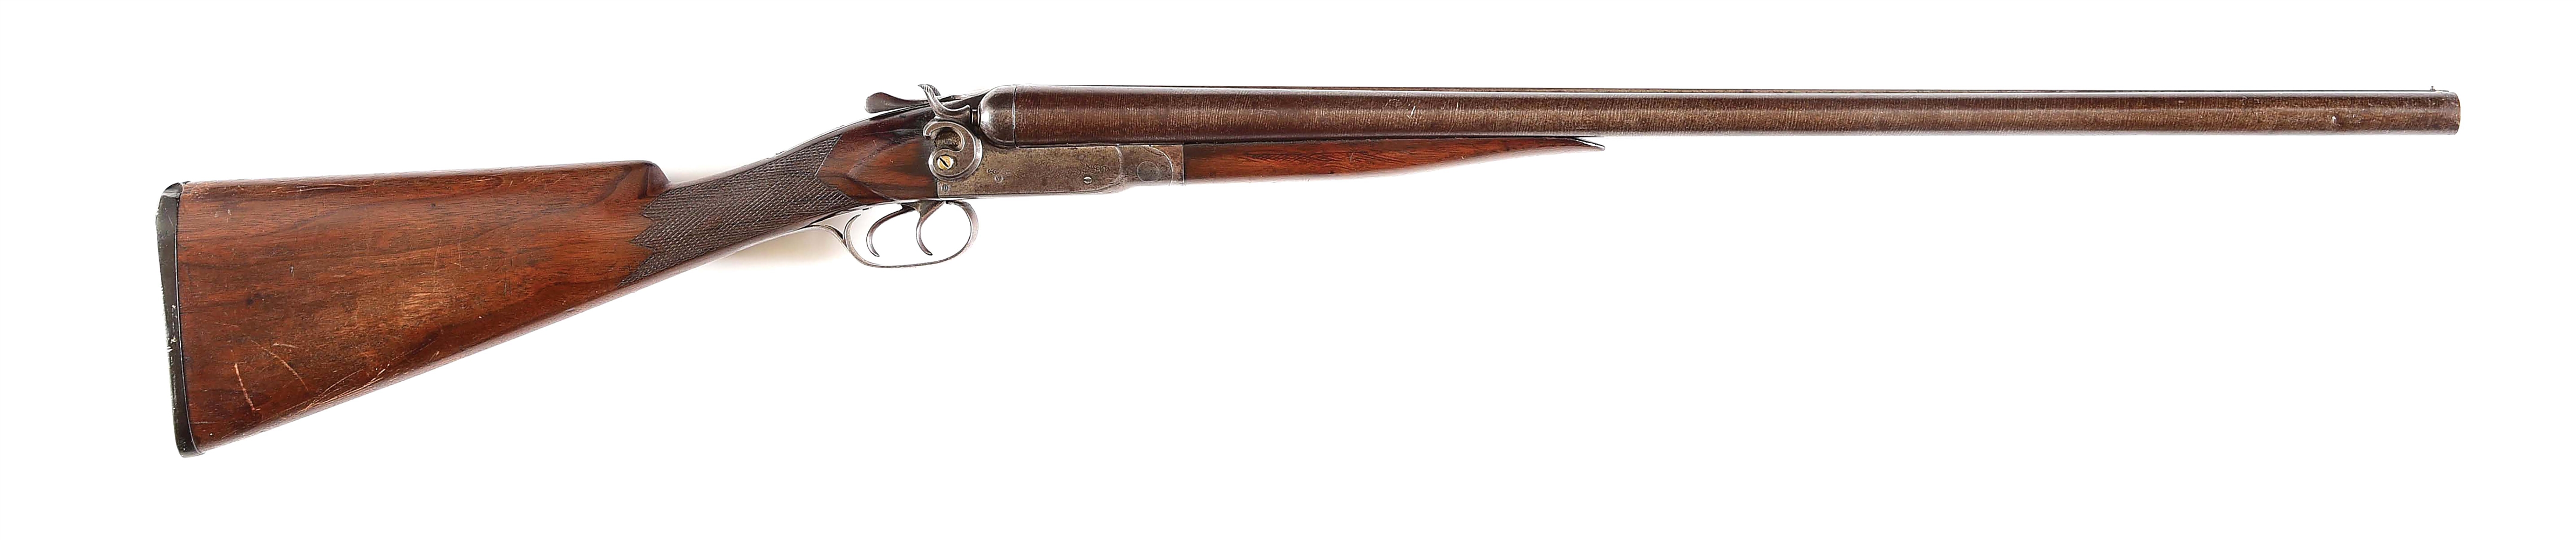 (A) ITHACA 12 BORE SIDE BY SIDE HAMMER FIRED SHOTGUN.